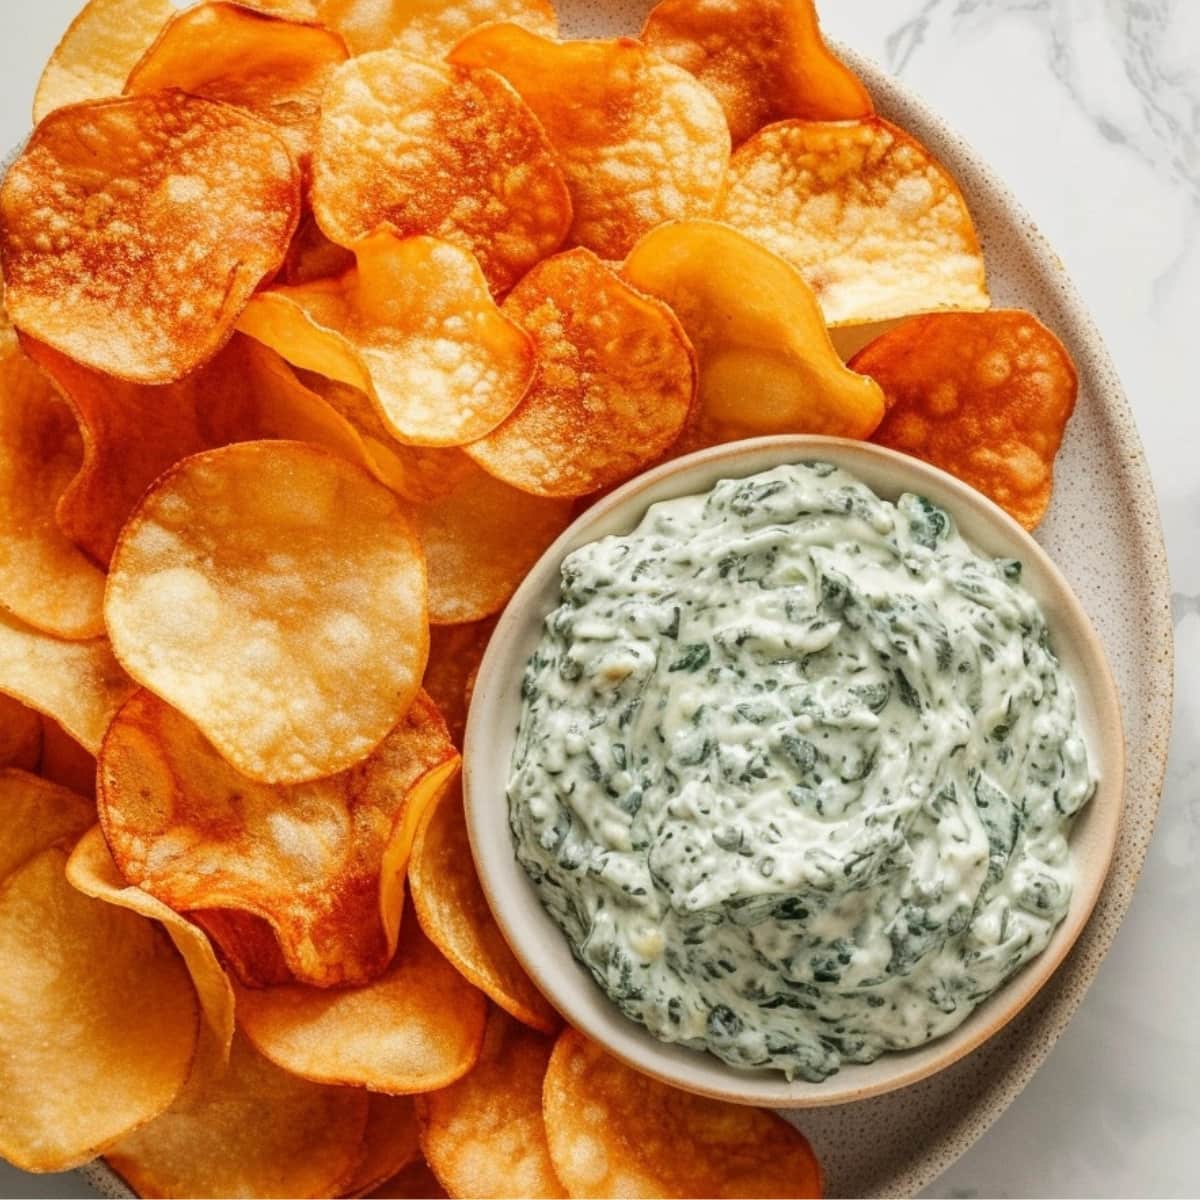 Potato chips with spinach dipping sauce.